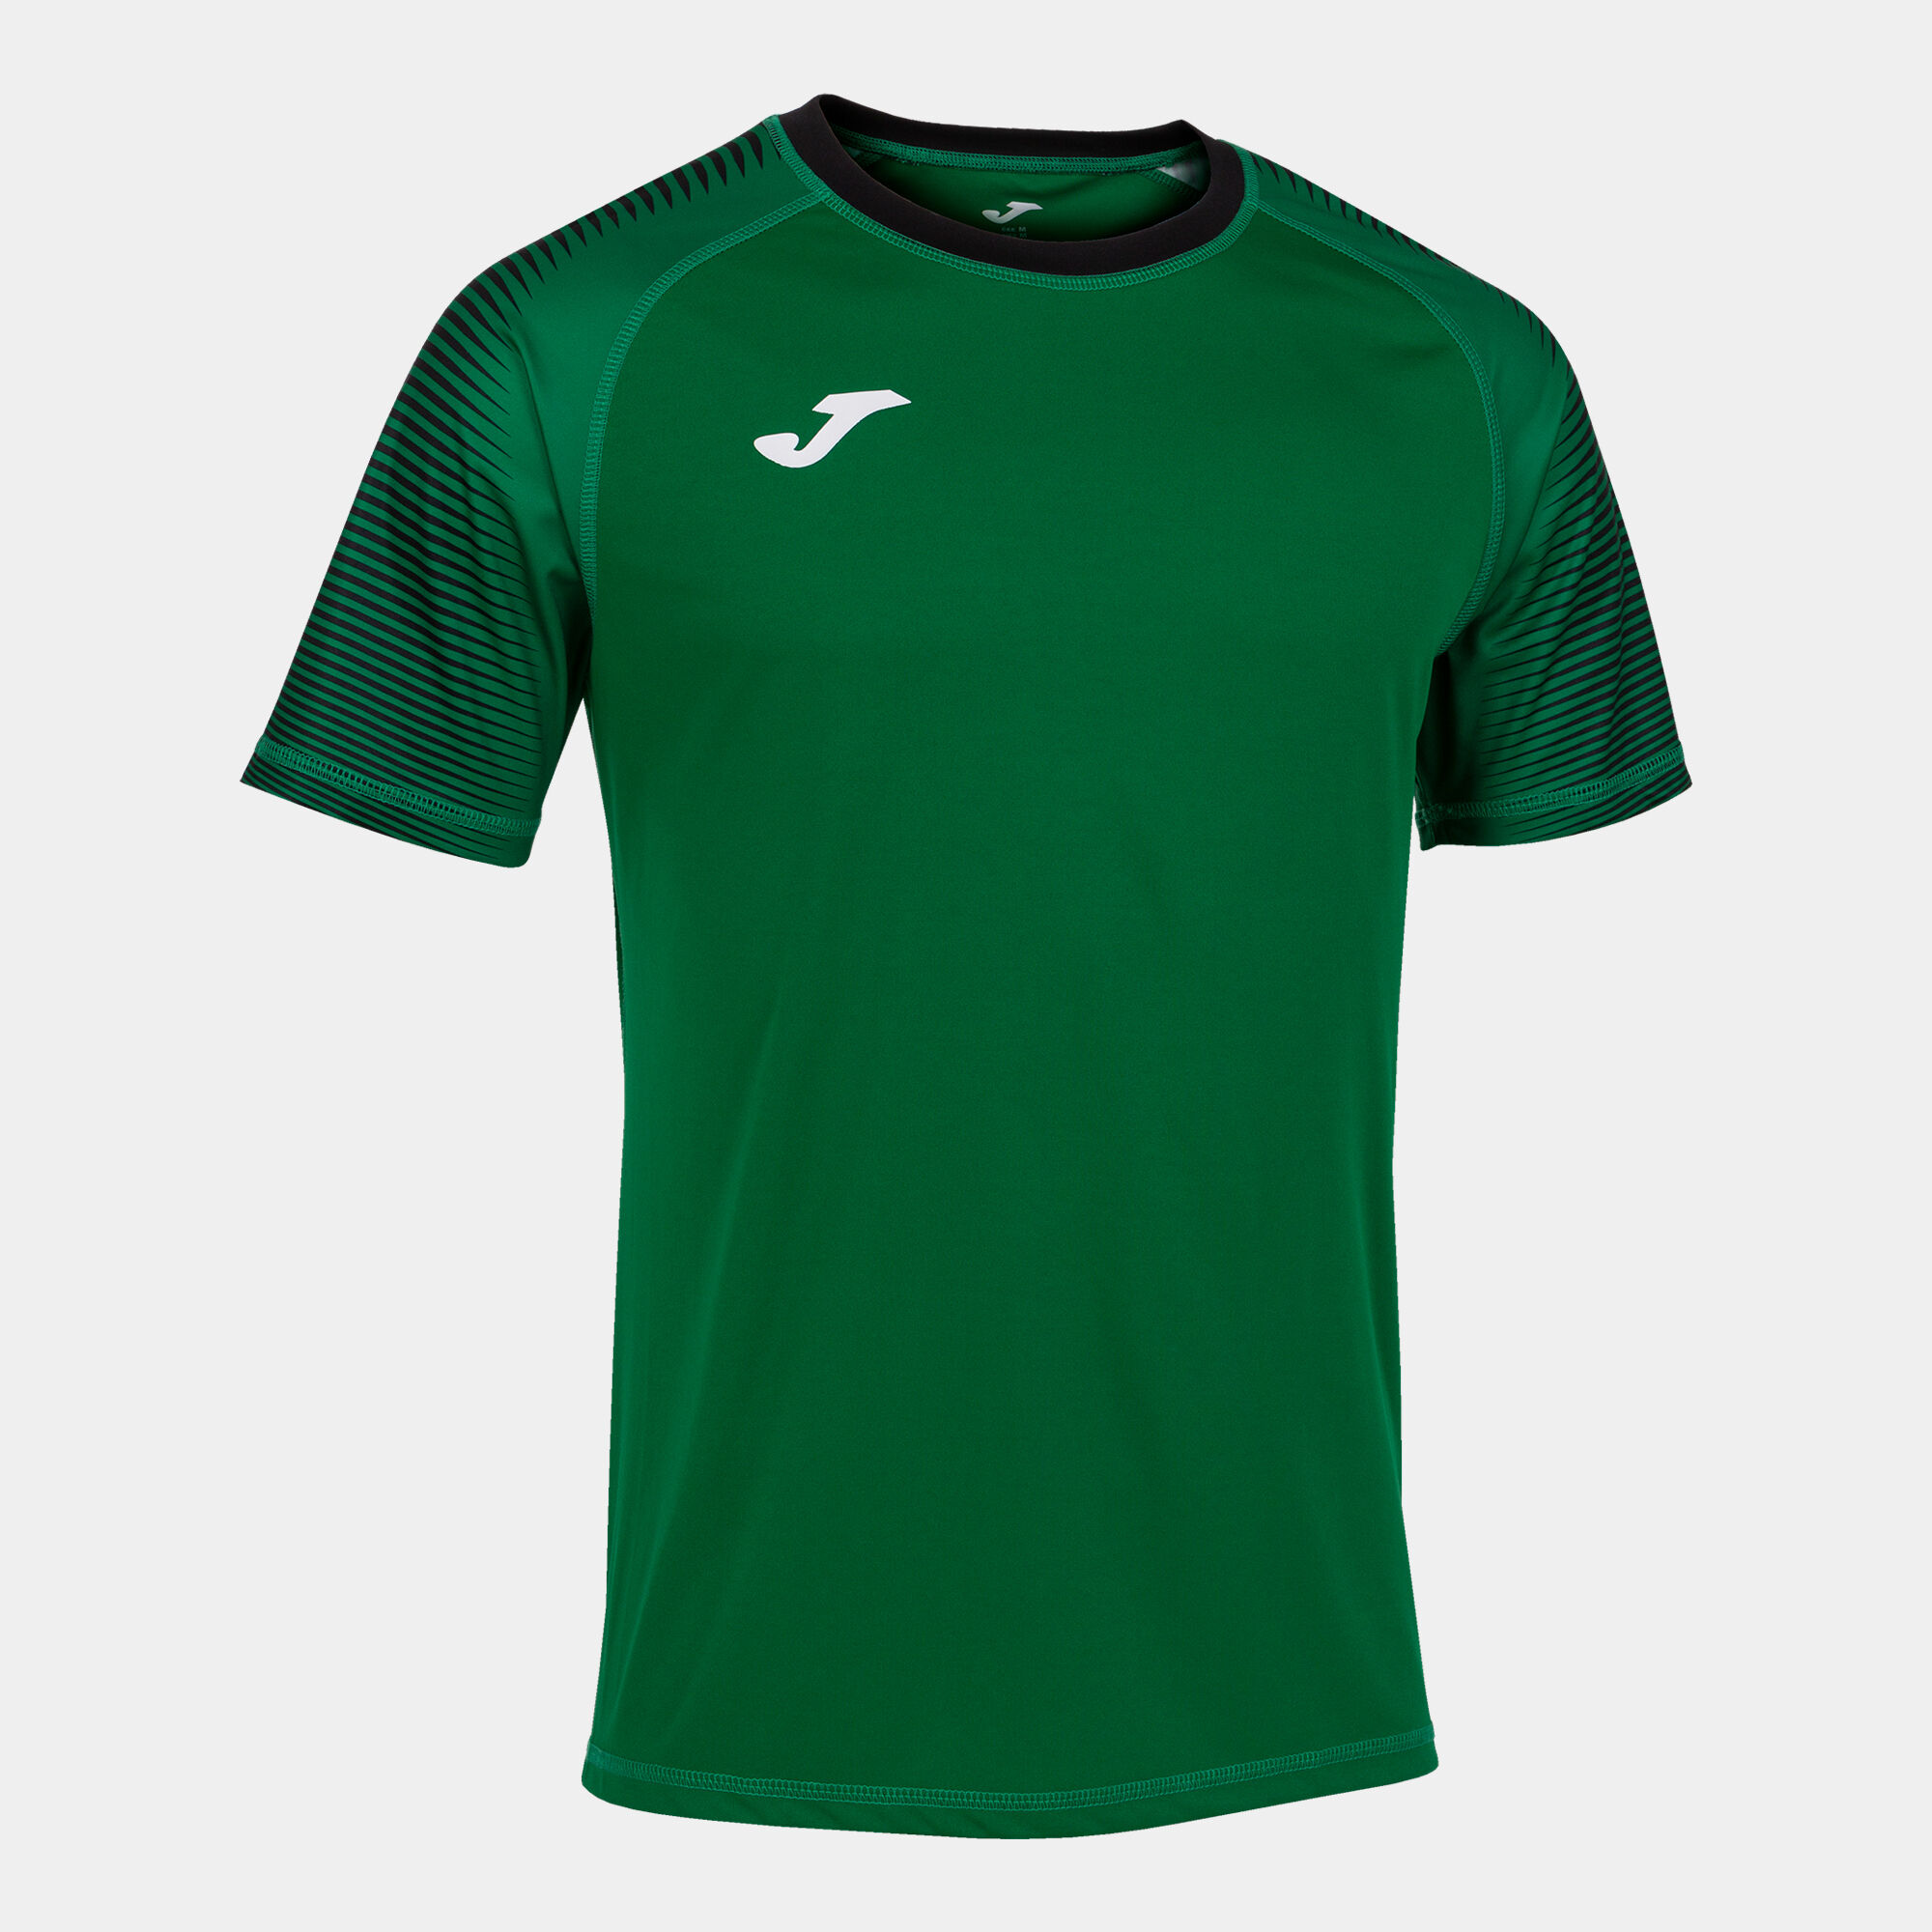 Maillot manches courtes homme Hispa III vert